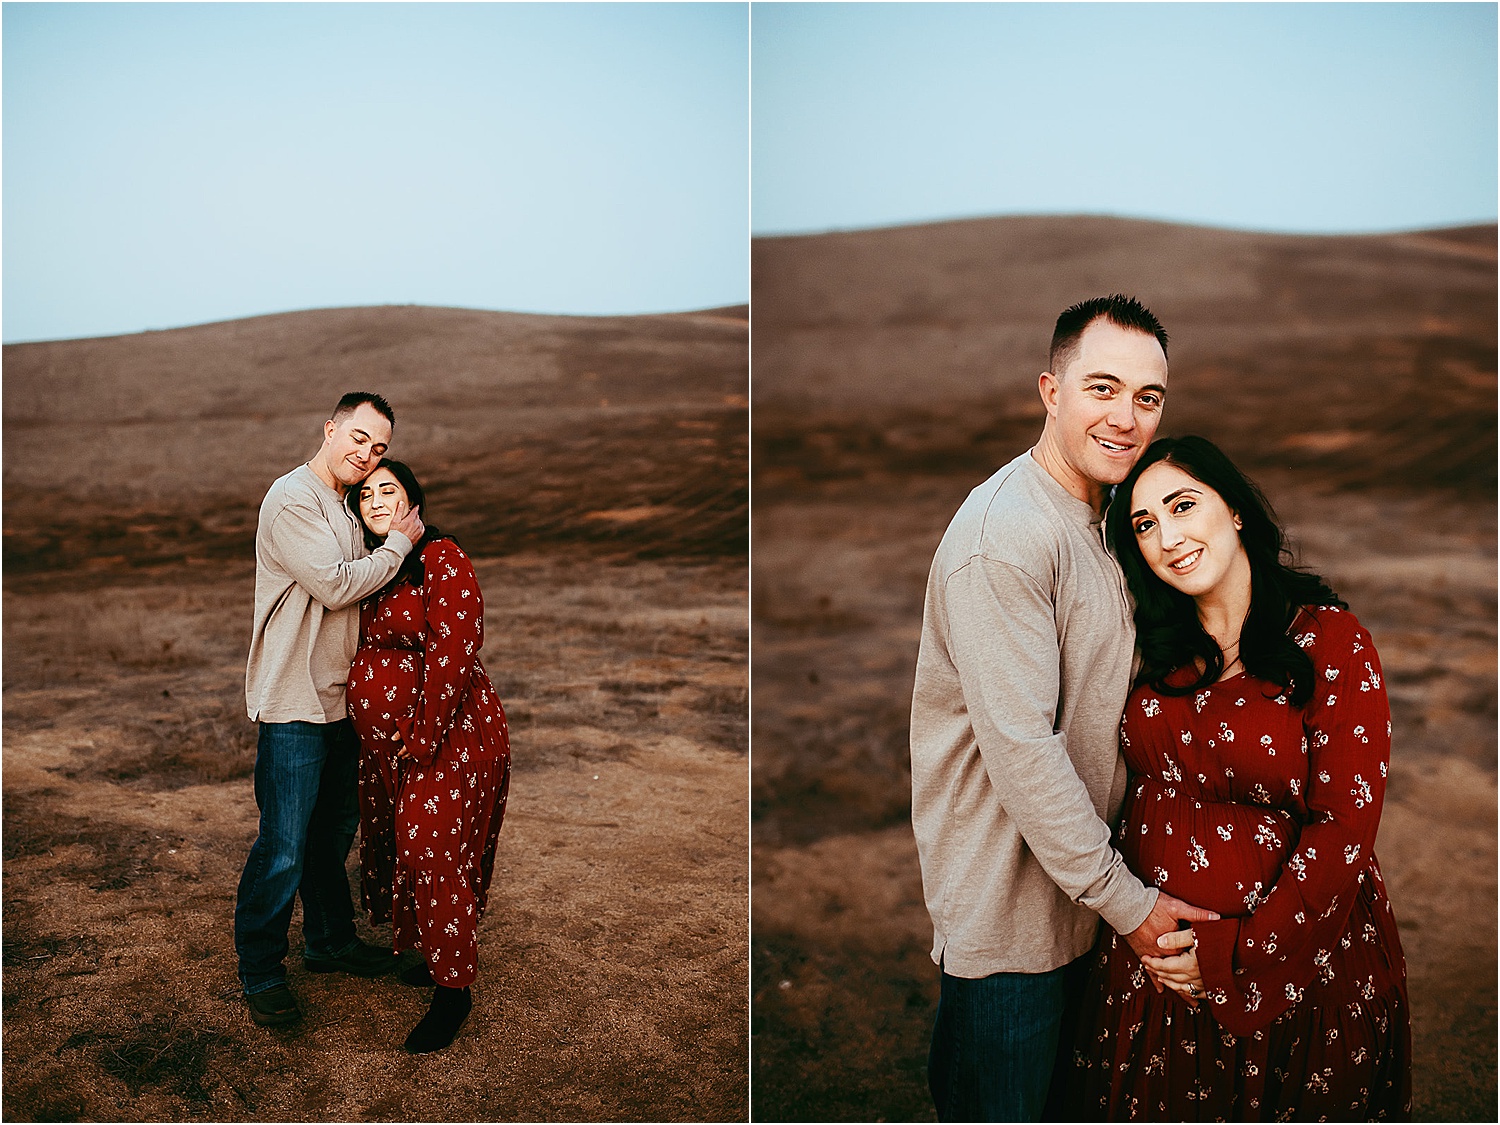 Spokane family photographer Jade averill photography captures a maternity session for a family of four